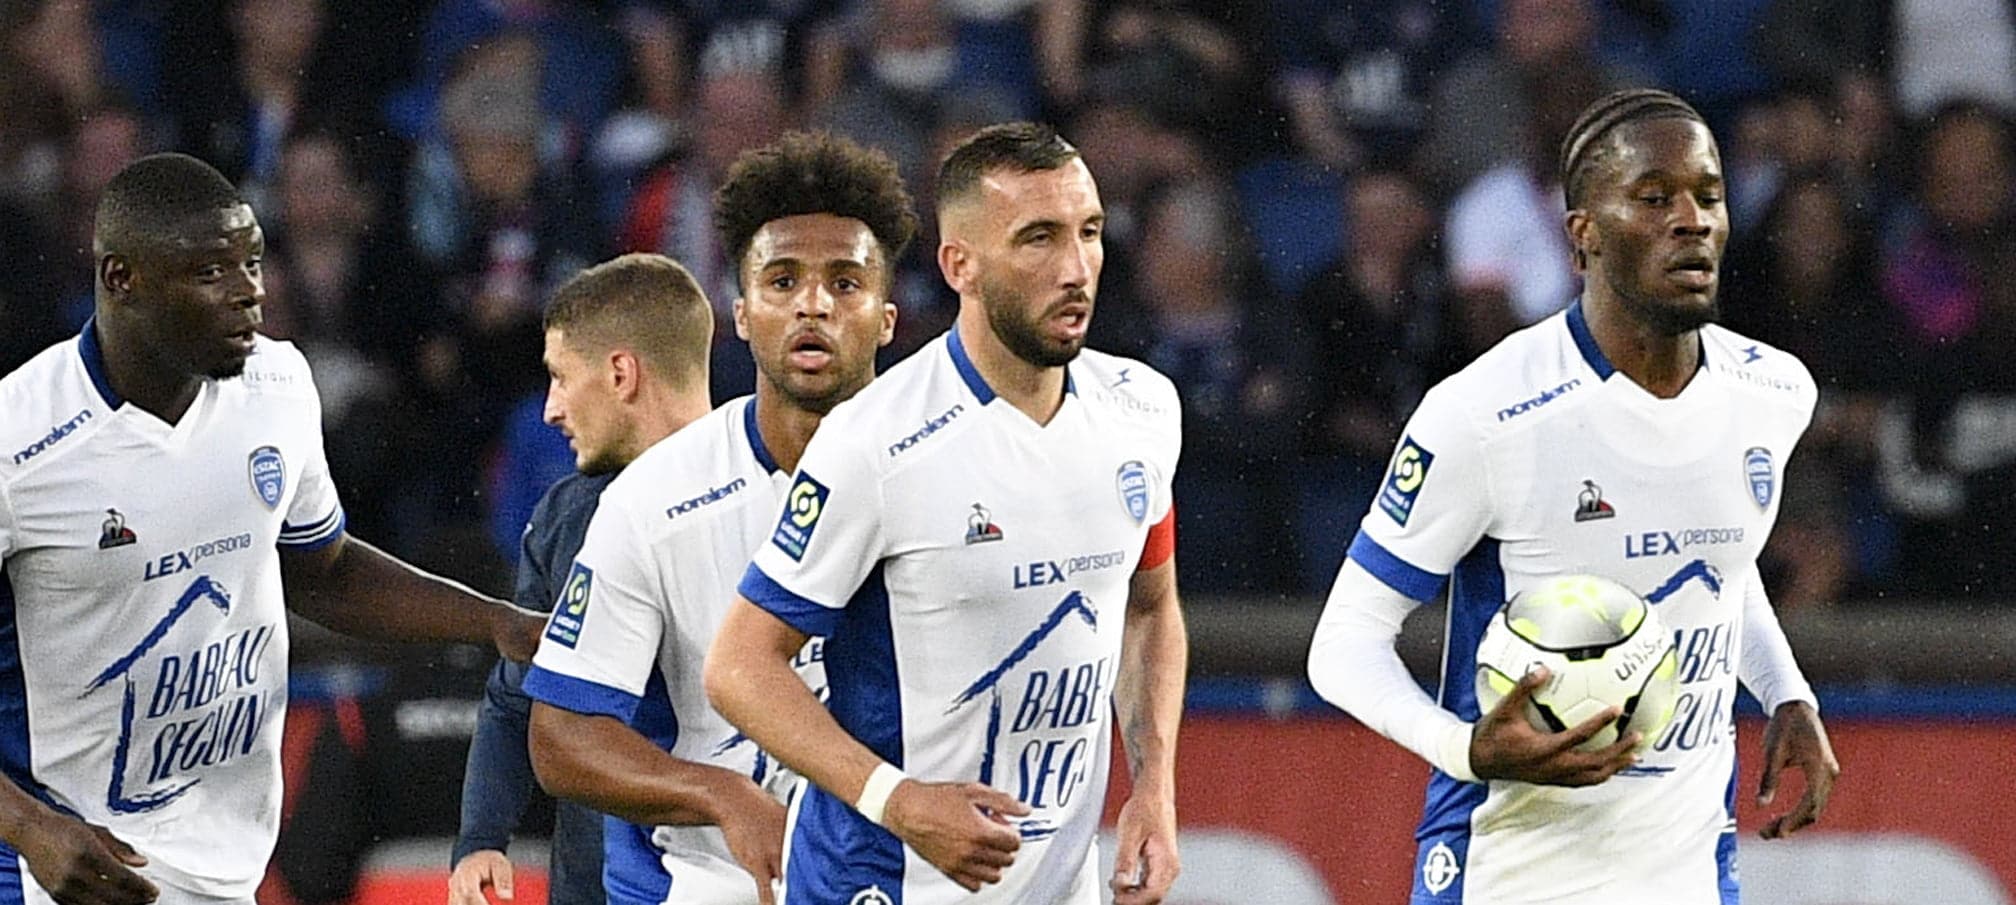 Troyes look safe after holding PSG